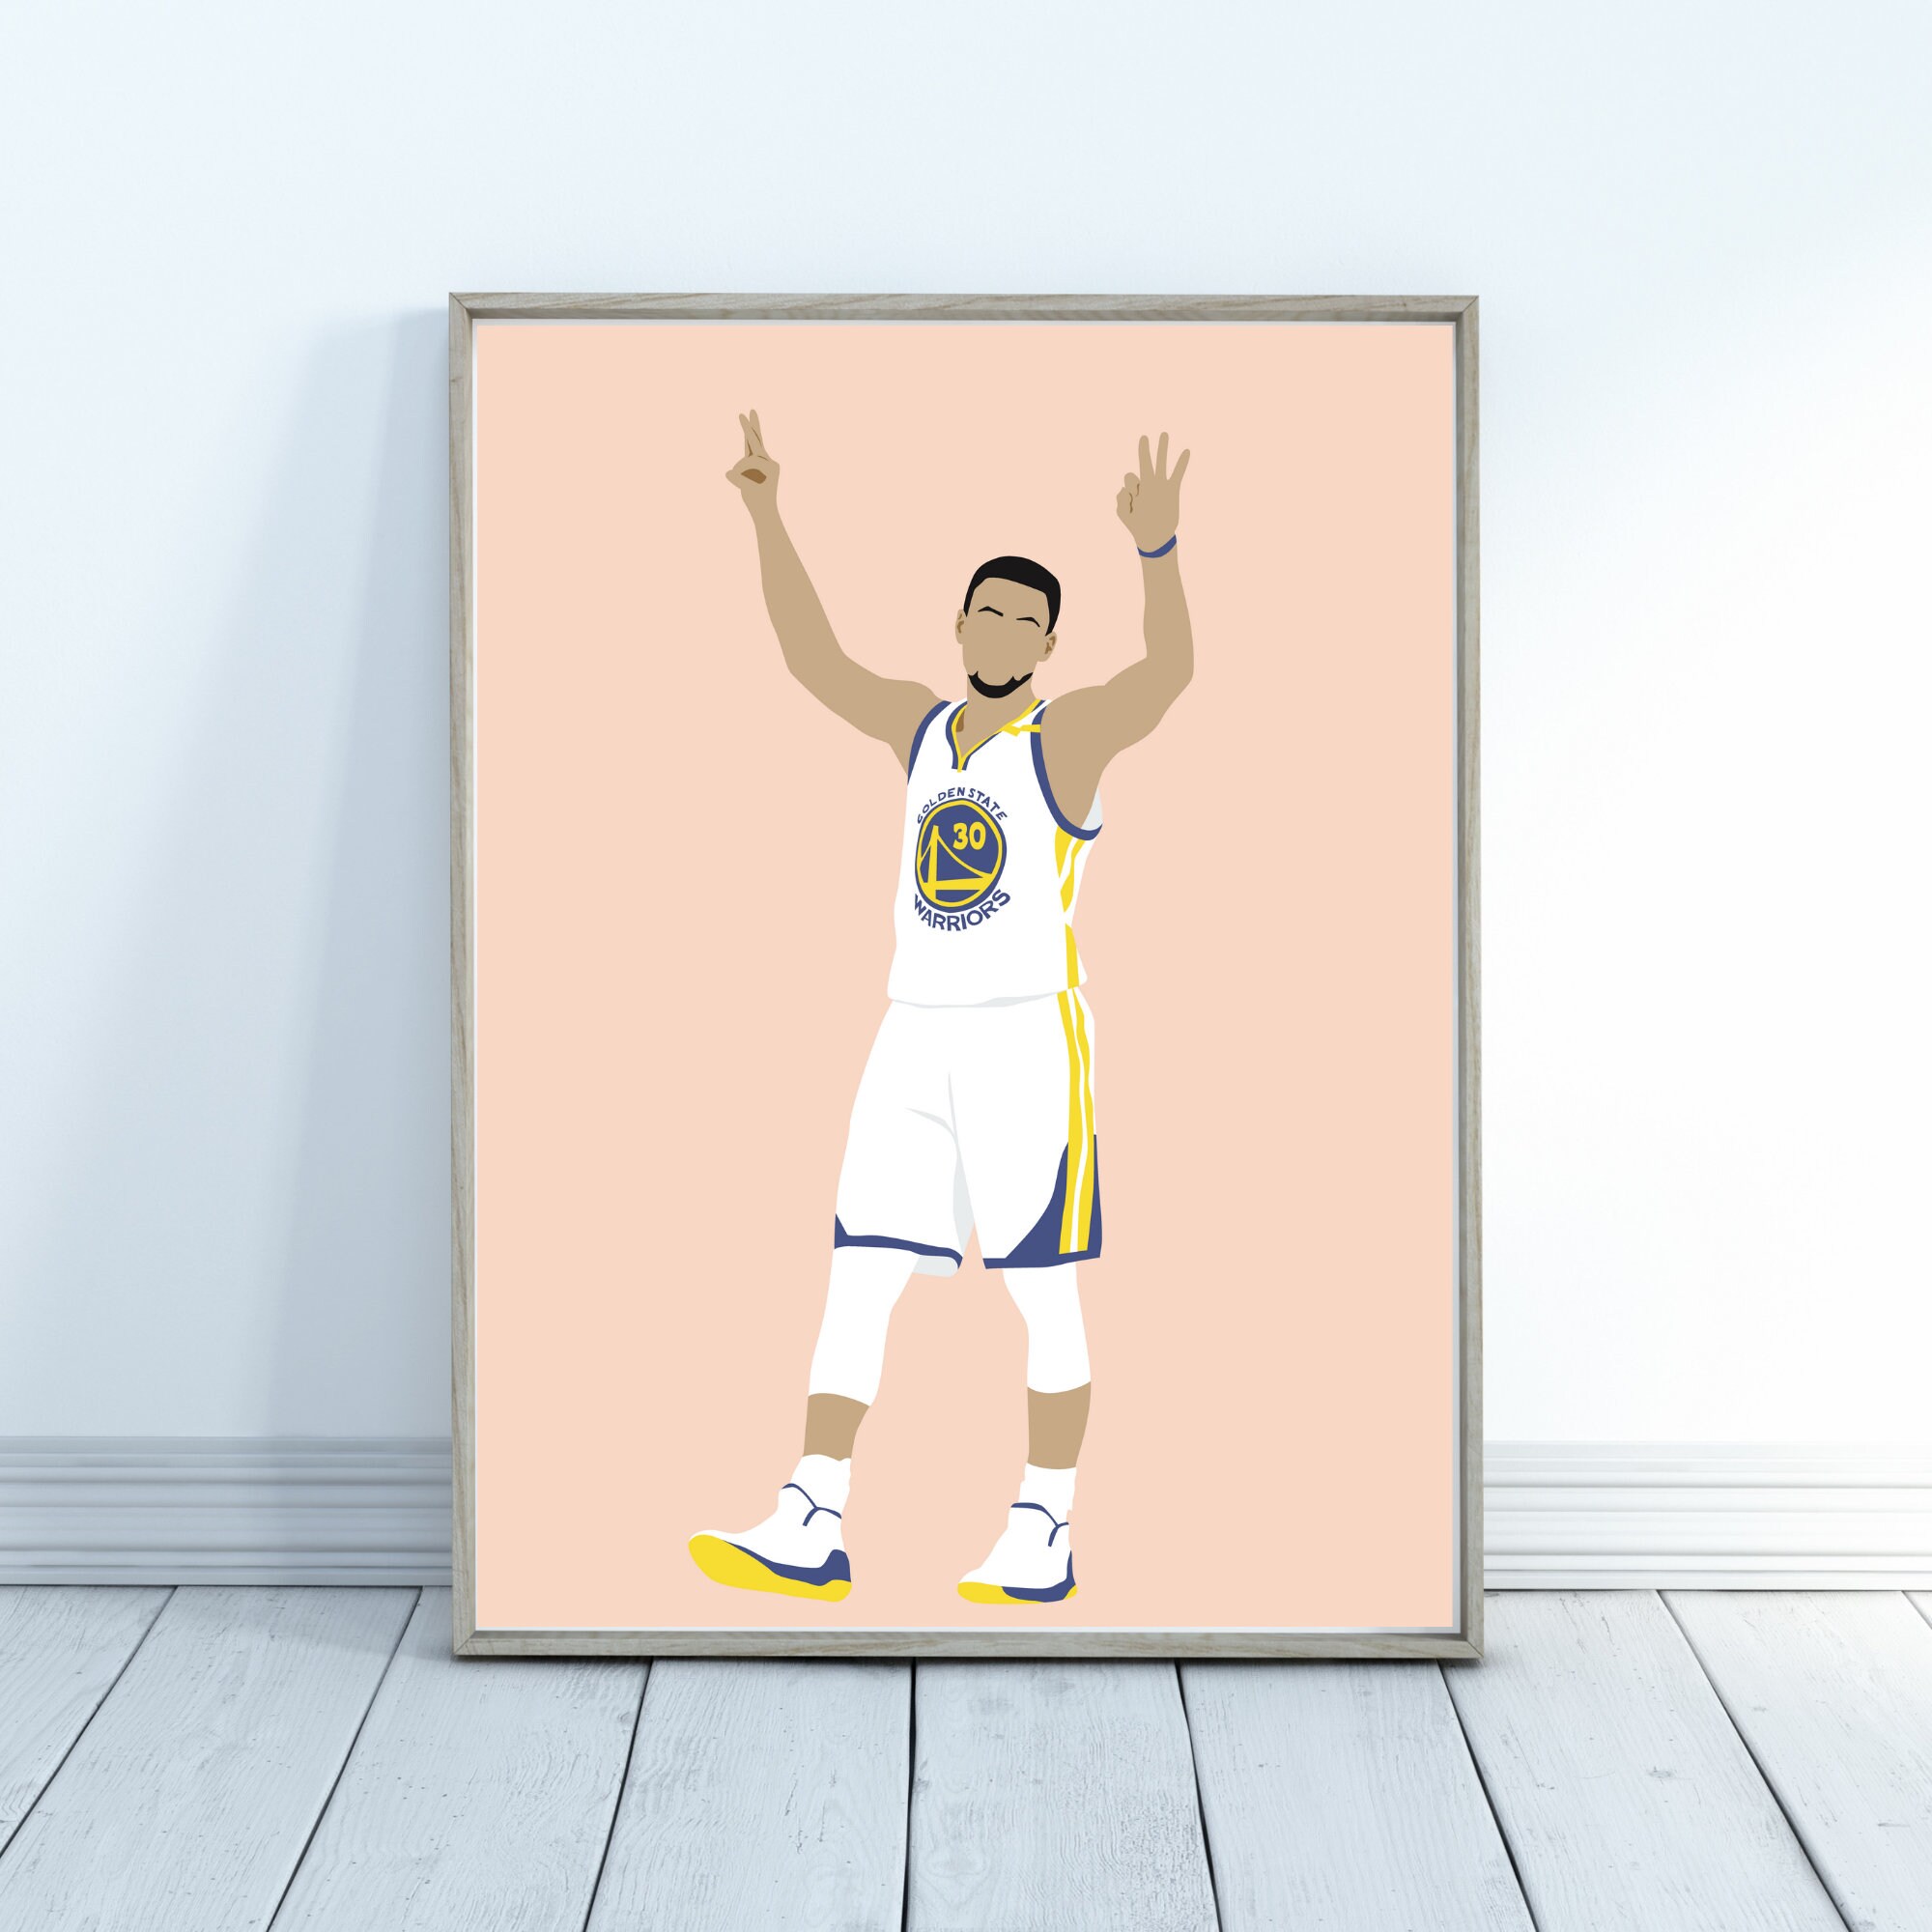 Steph Curry Three Poster - Basketball Posters - Basketball Prints - NBA Poster - Steph Curry Print - Basketball Gifts